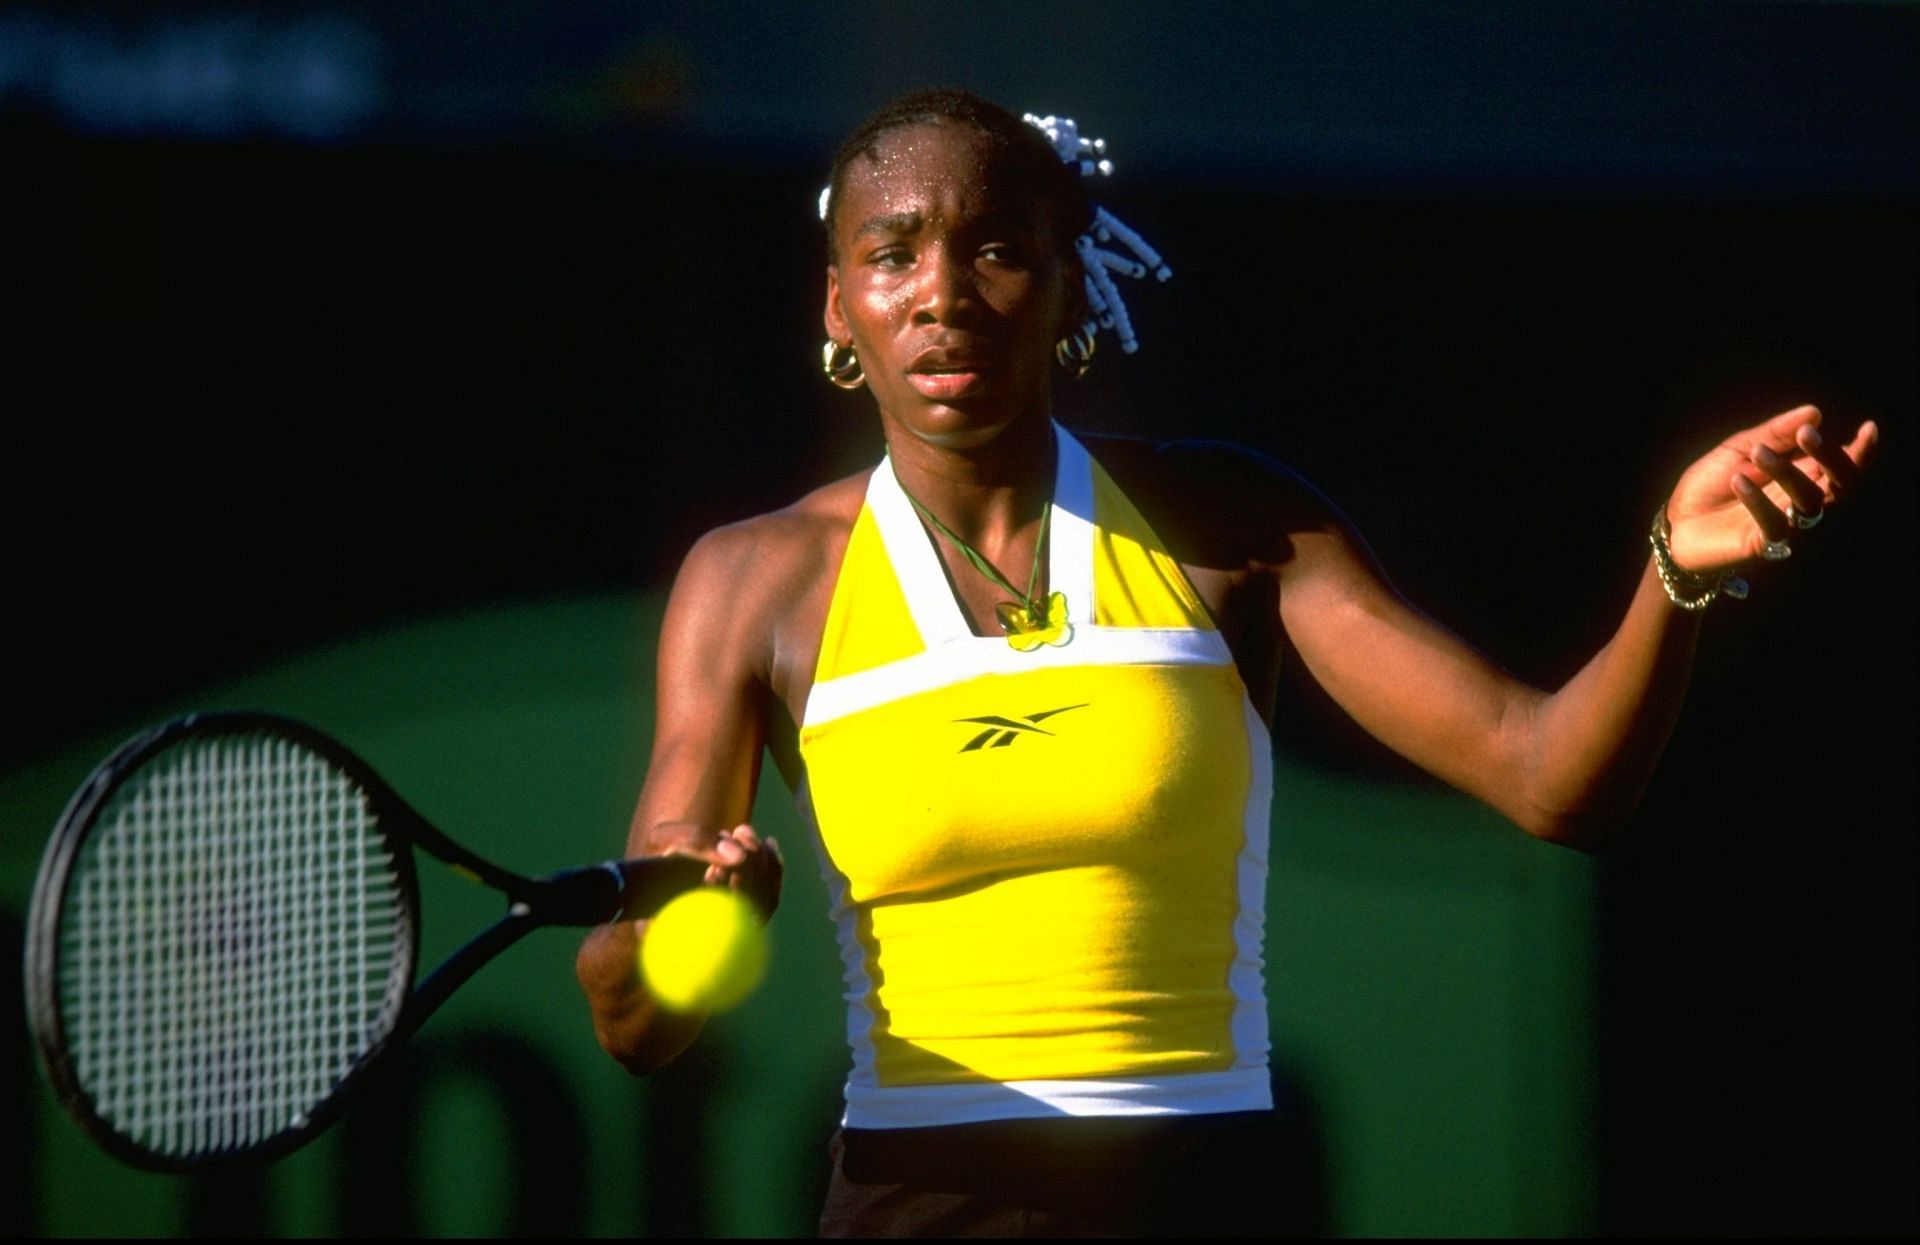 Venus won the 1999 Lipton Championships by beating Serena Williams in the final